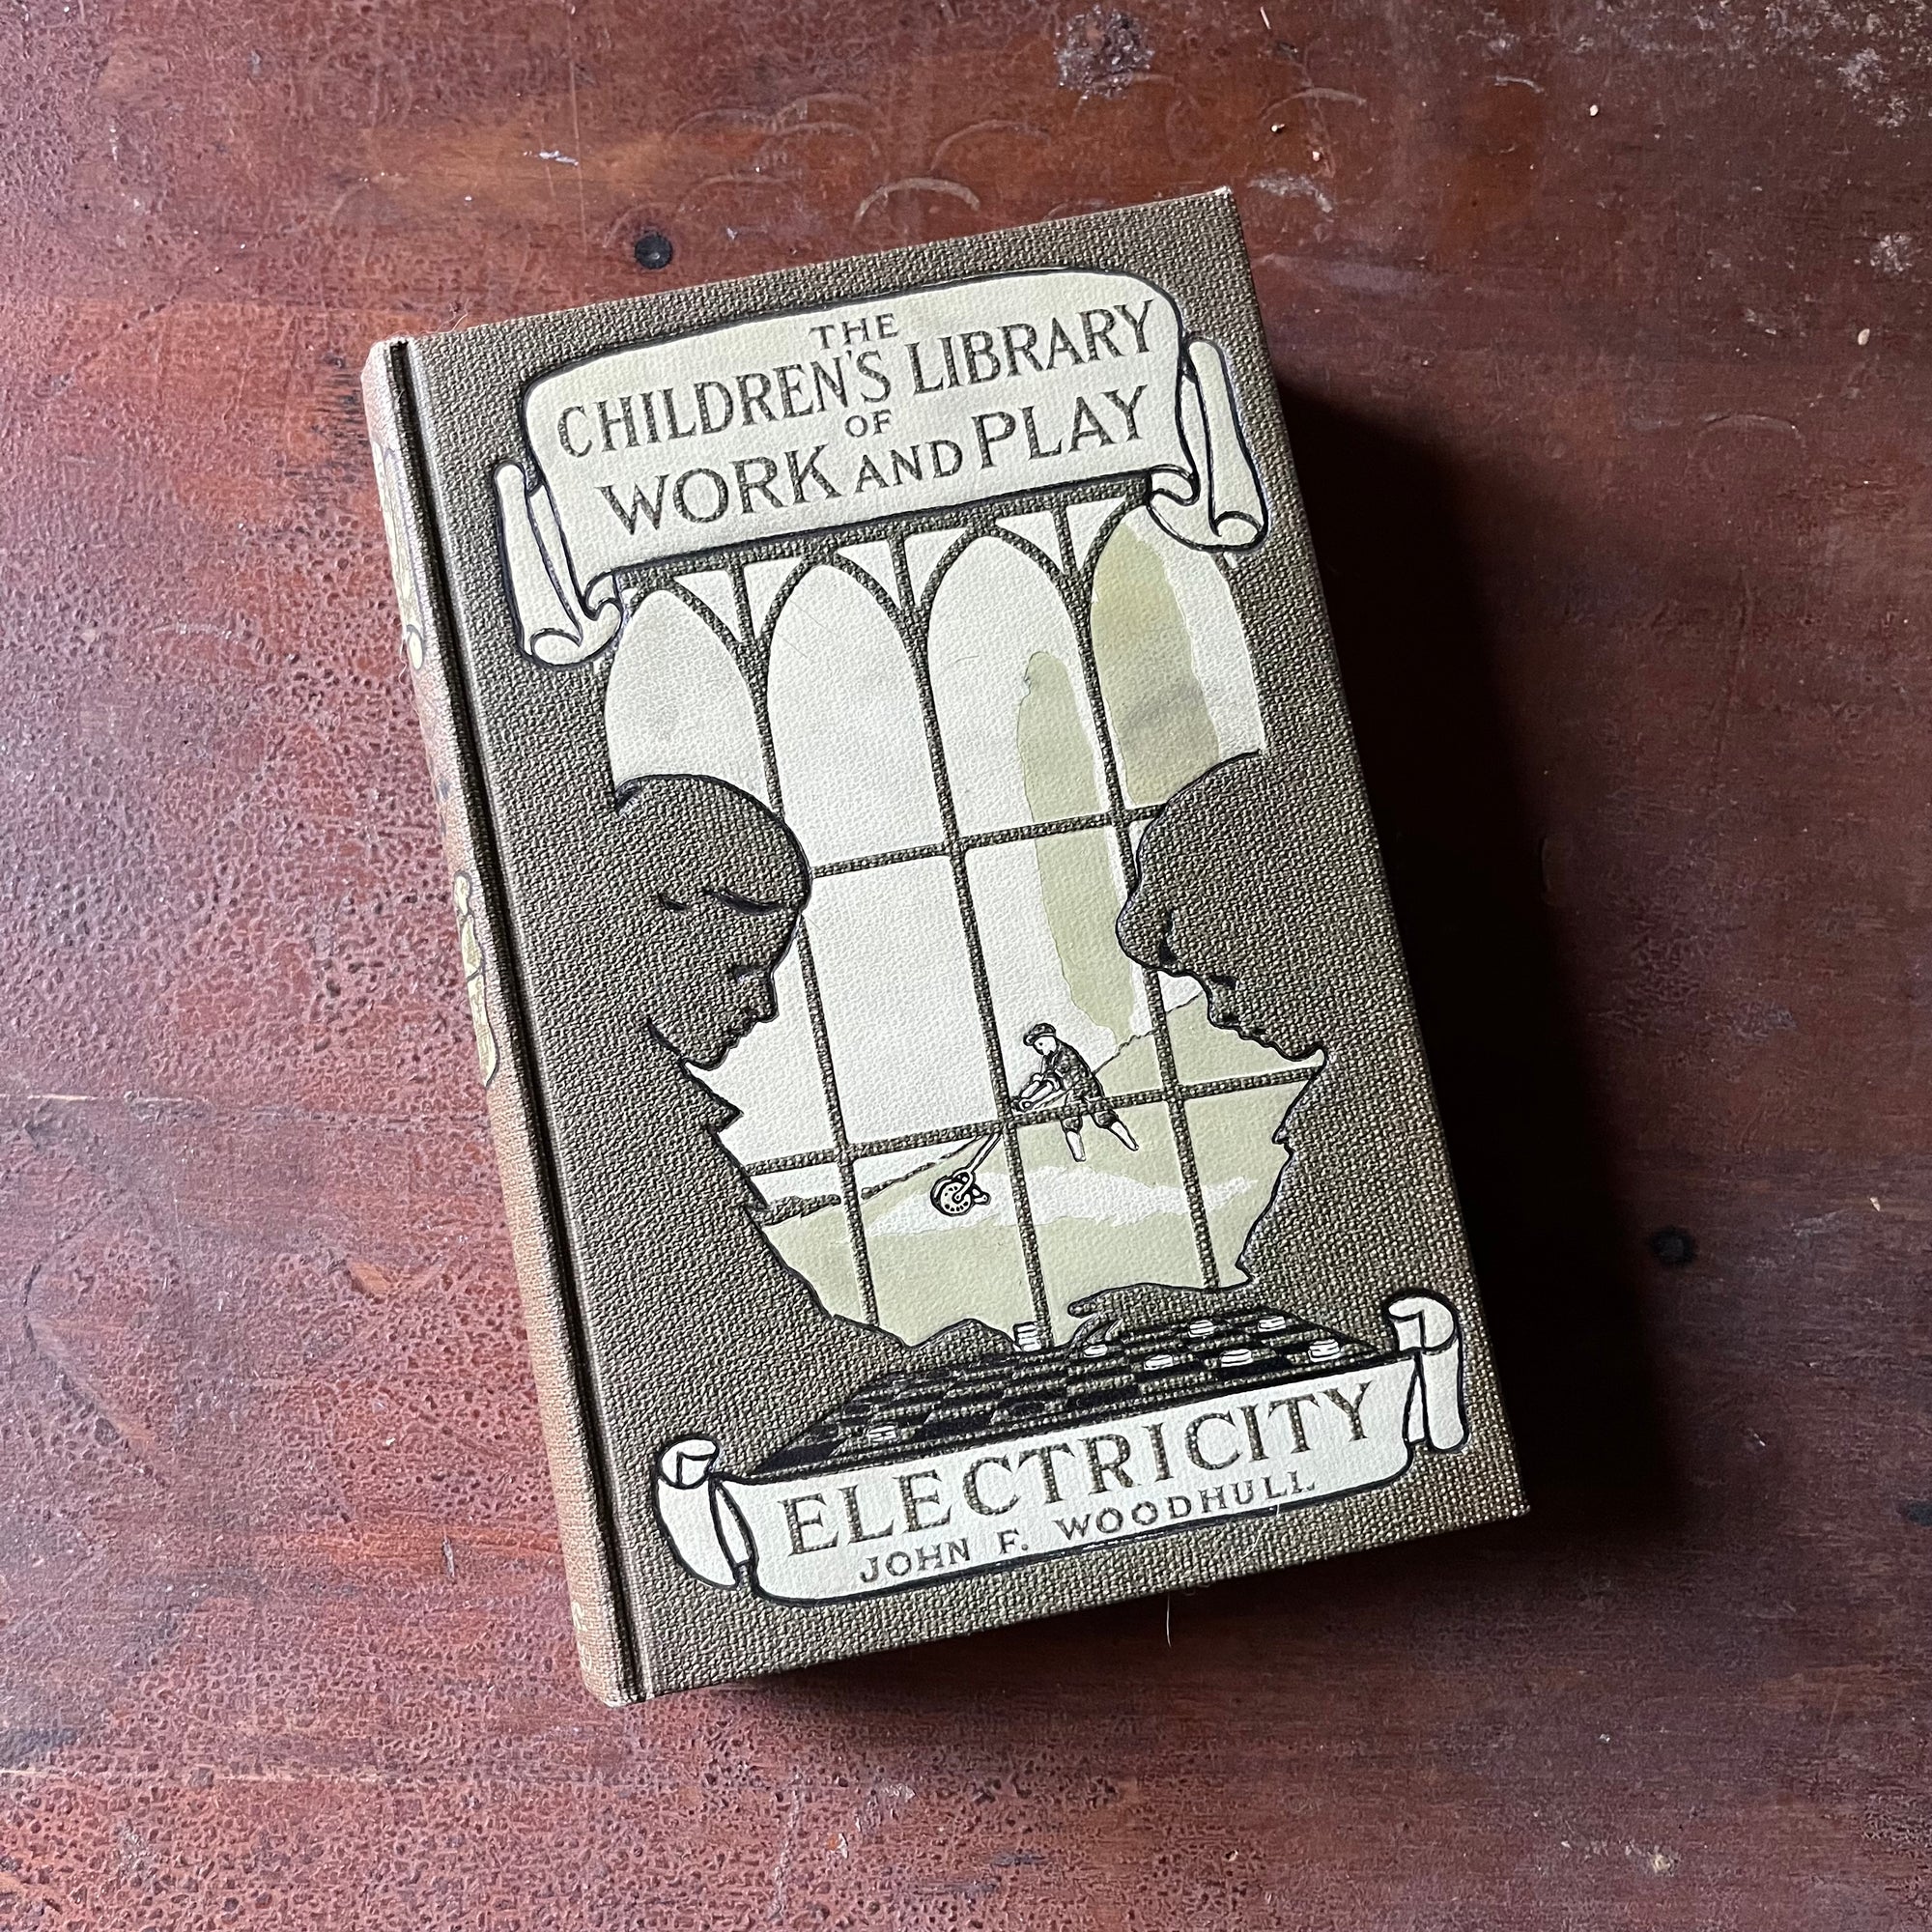 The Children's Library of Work and Play:  Electricity by John F. Woodhull - front cover view of the book sitting on a wood table